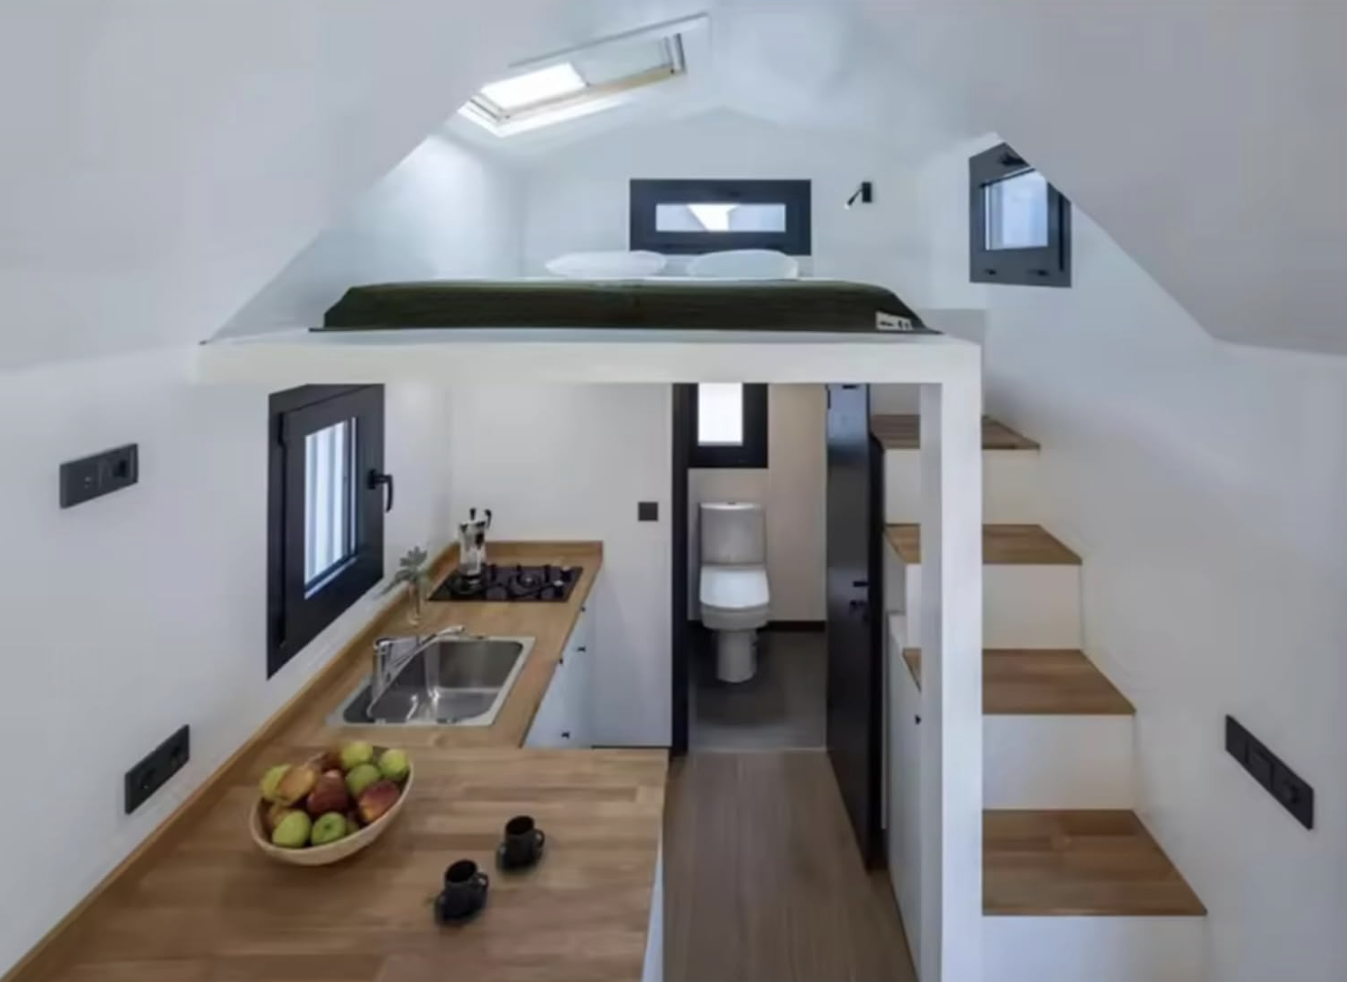 Interior of a tiny home showing kitchen, stairs to loft bed, and bathroom under loft